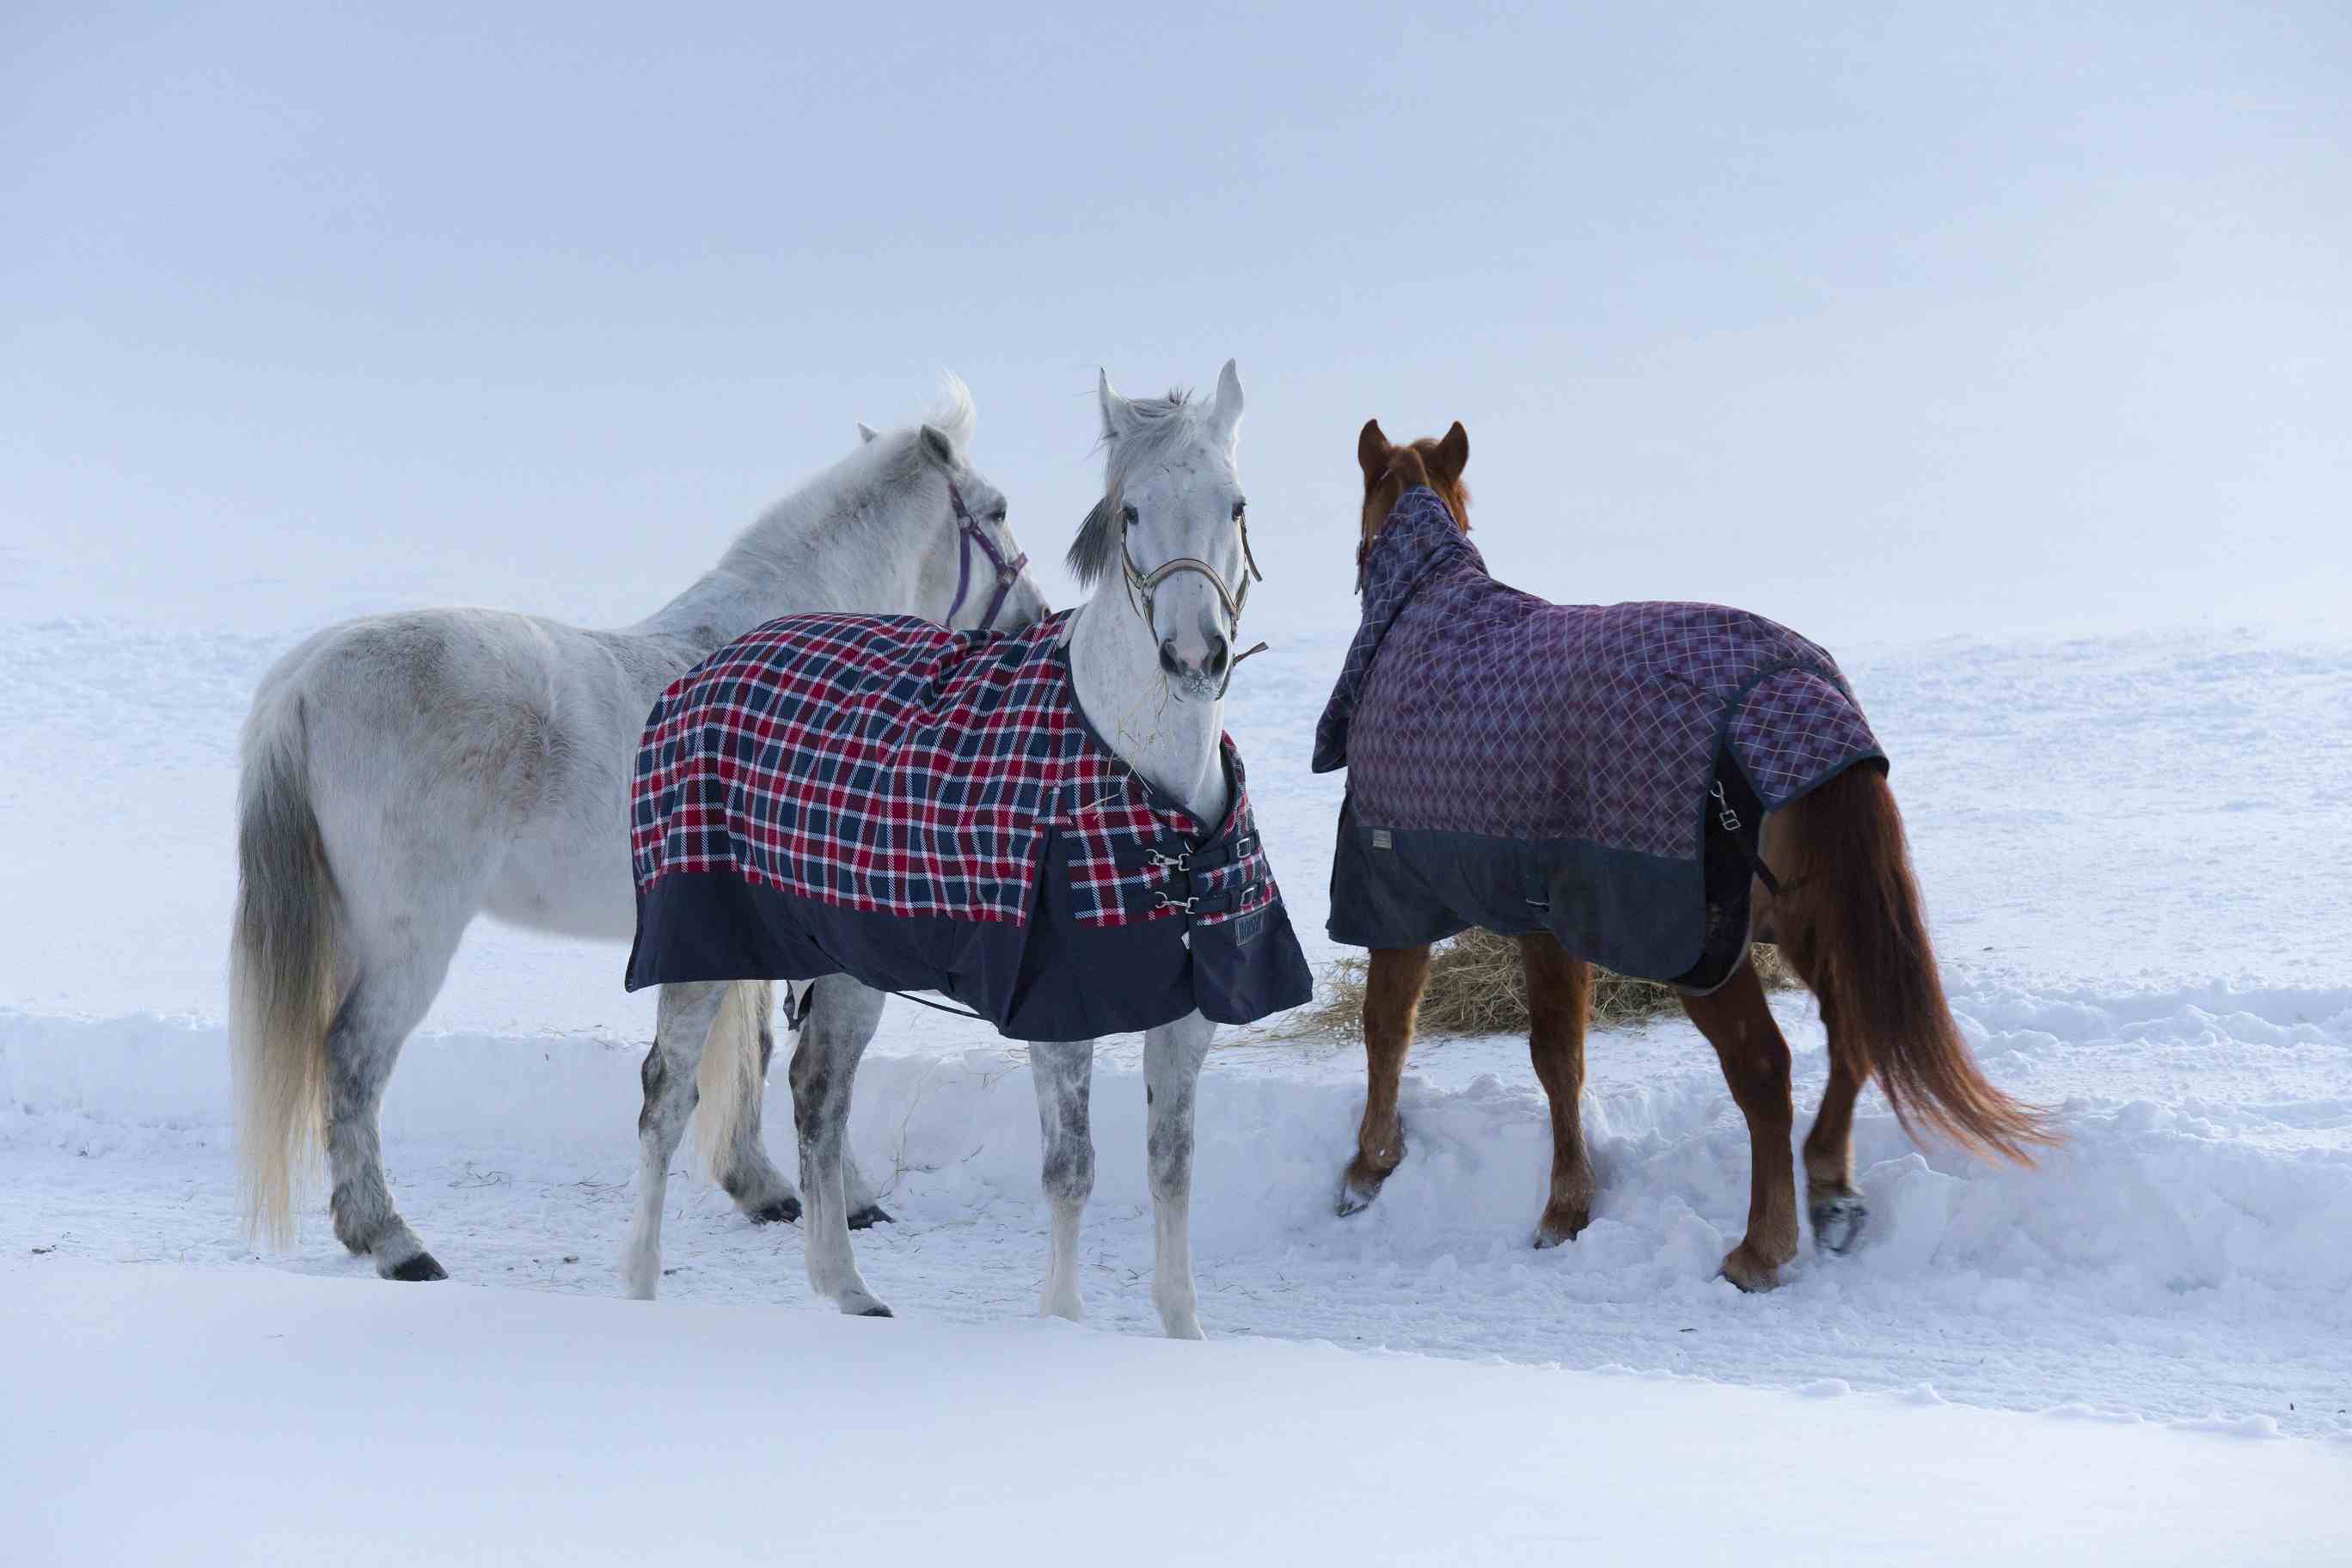 Three horses in the snow with two of them wearing blankets.